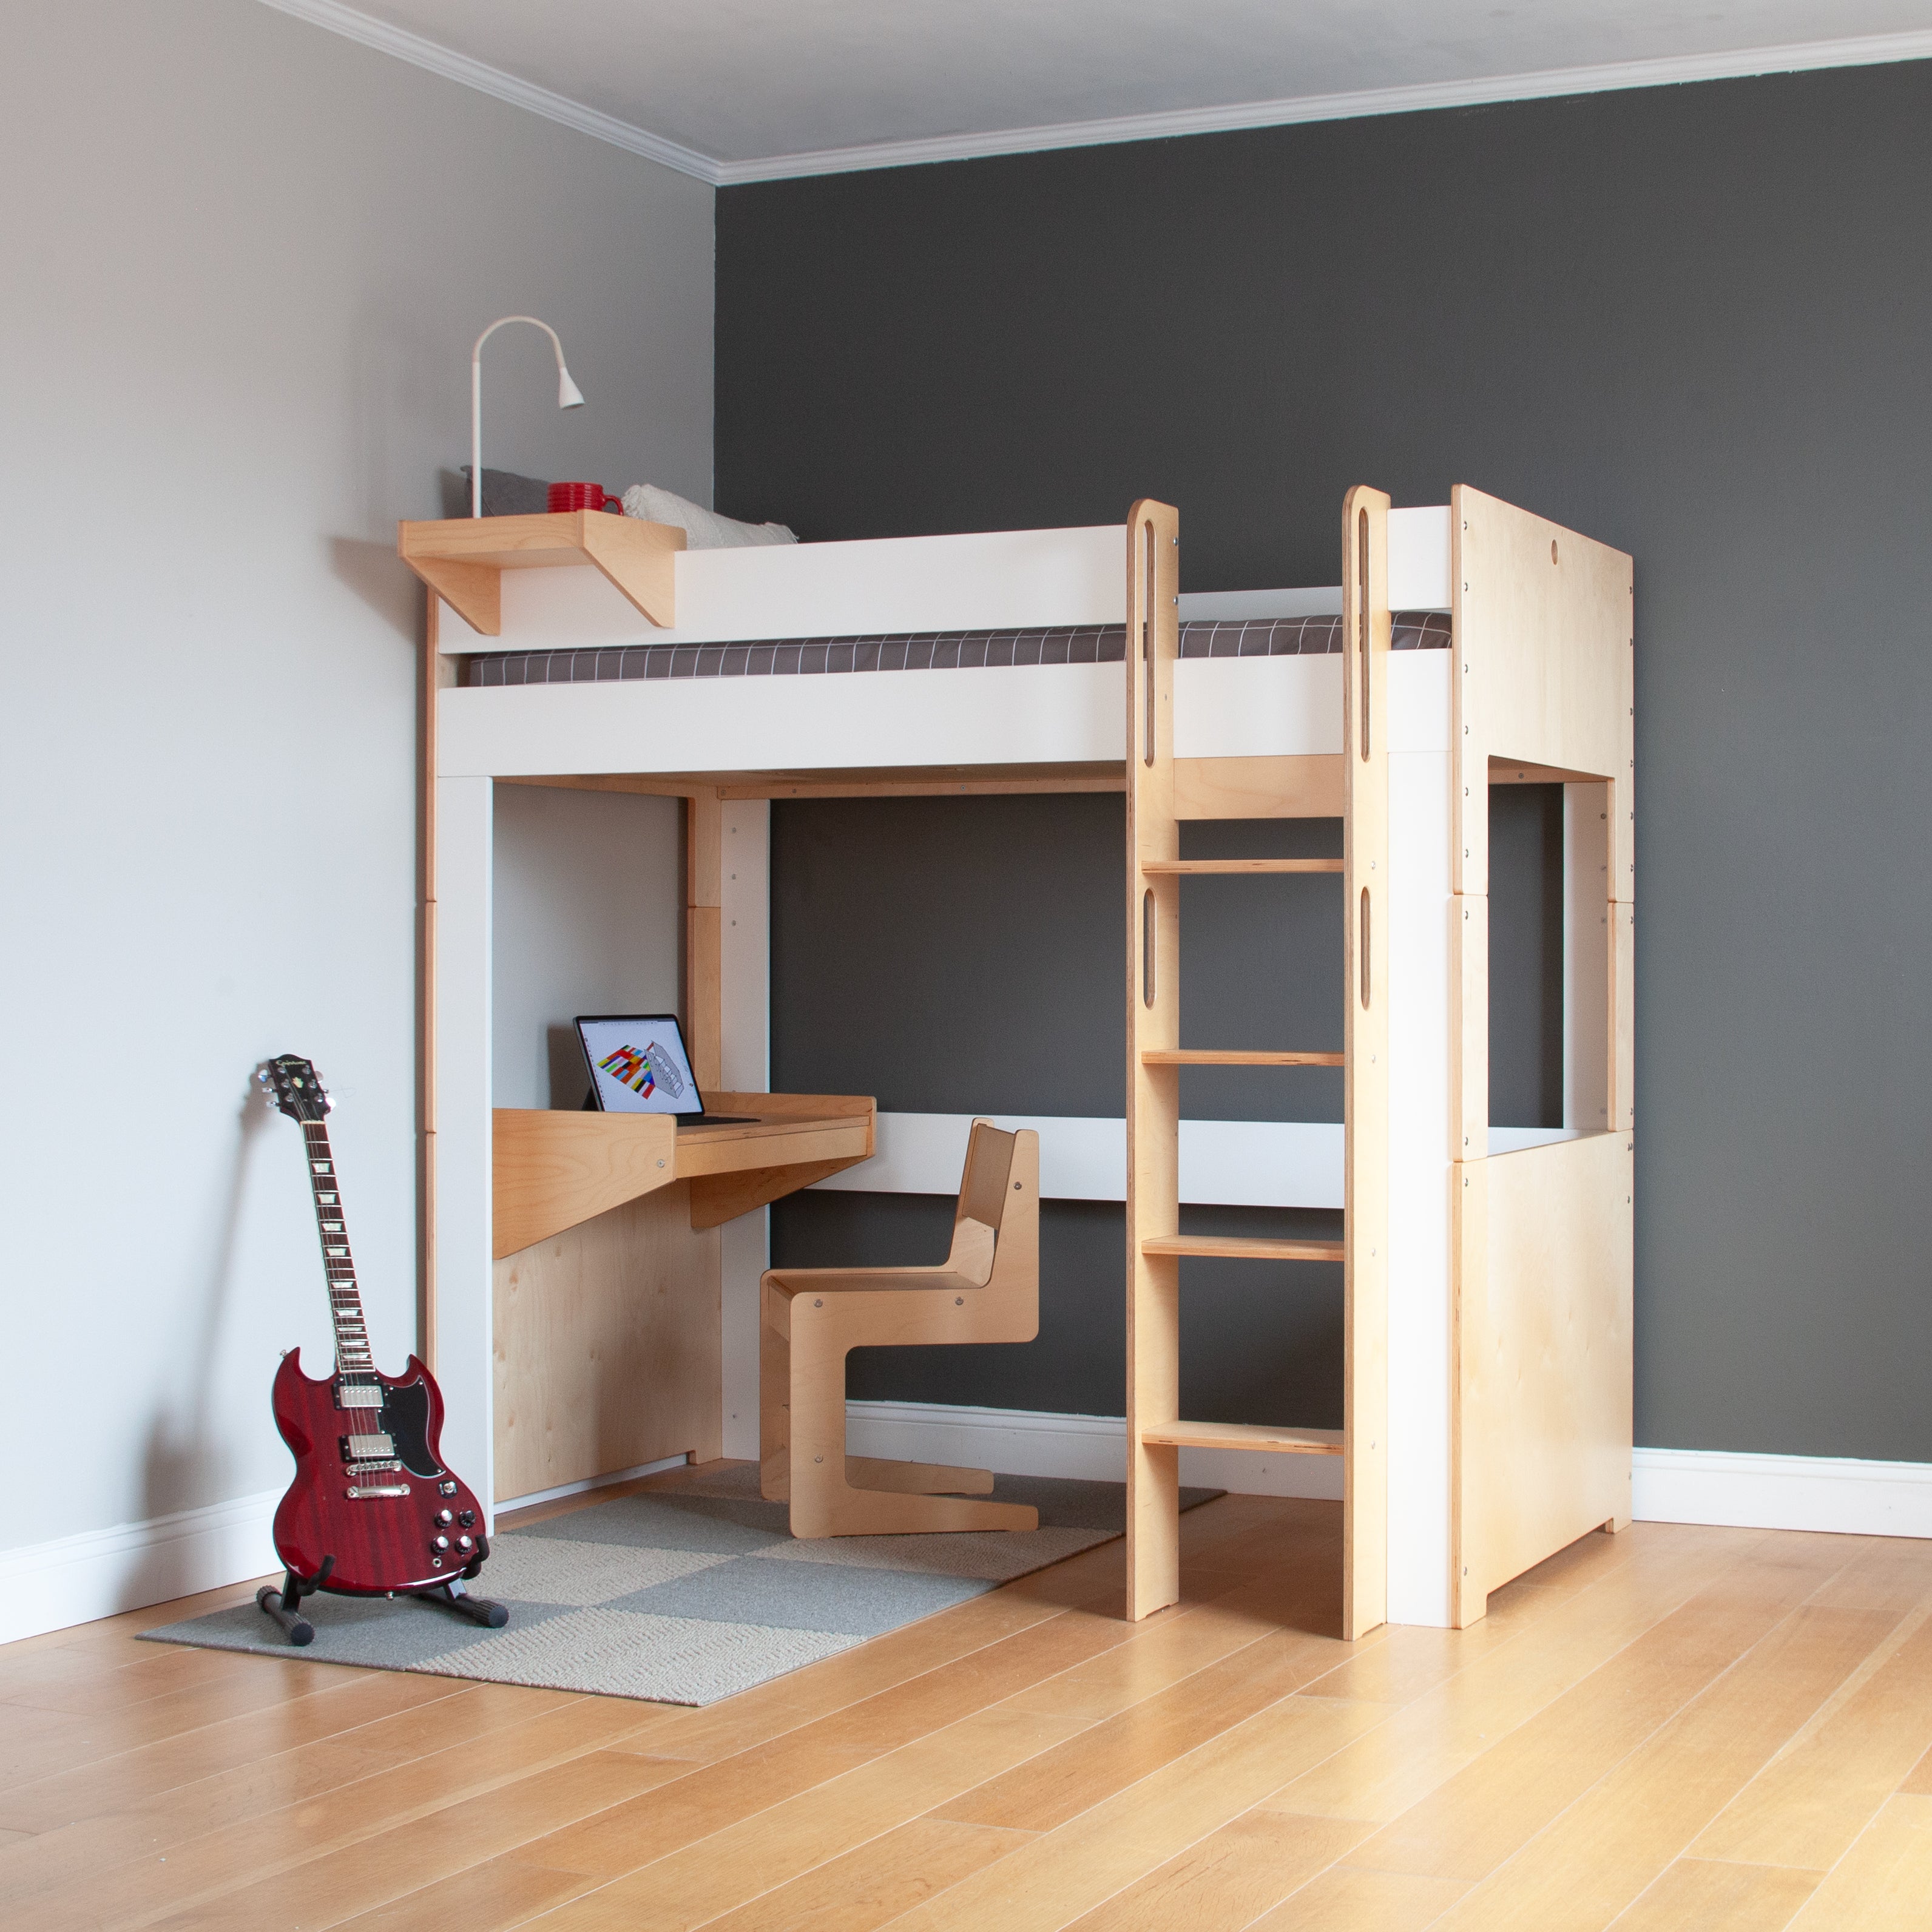 Modern loft bed with desk and staircase, gray walls, and a red electric guitar on the floor.